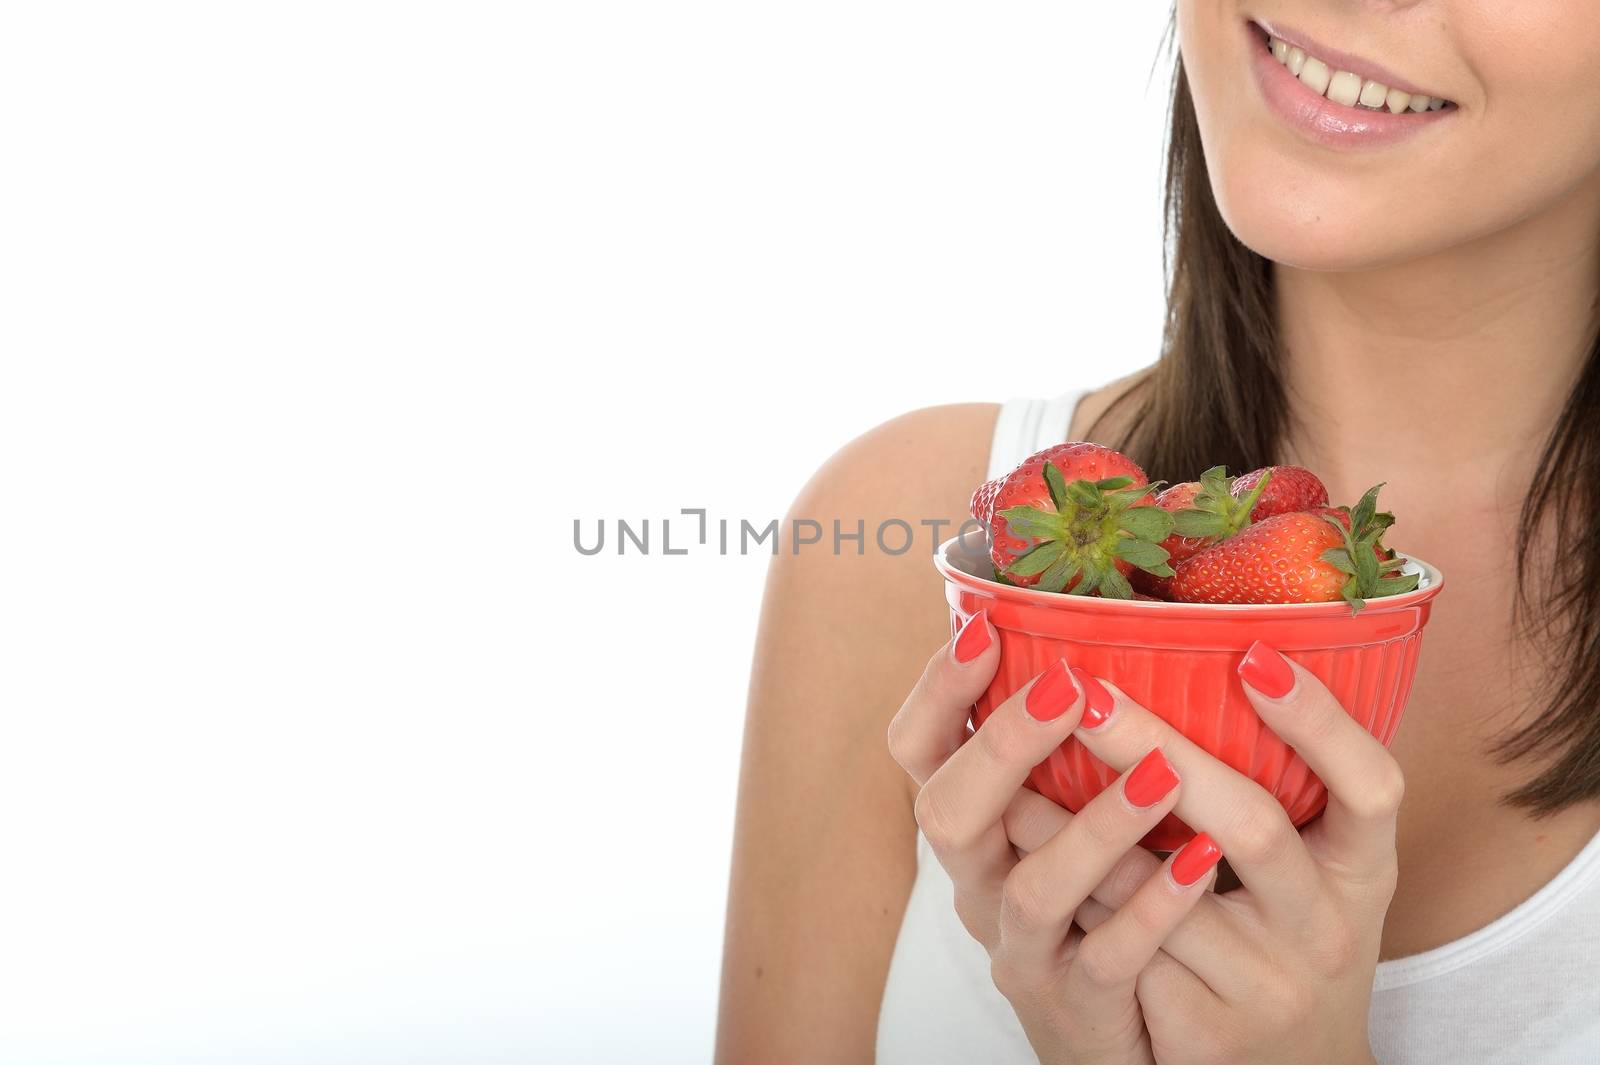 Attractive Healthy Young Woman Holding a Bowl of Fresh Ripe Juic by Whiteboxmedia